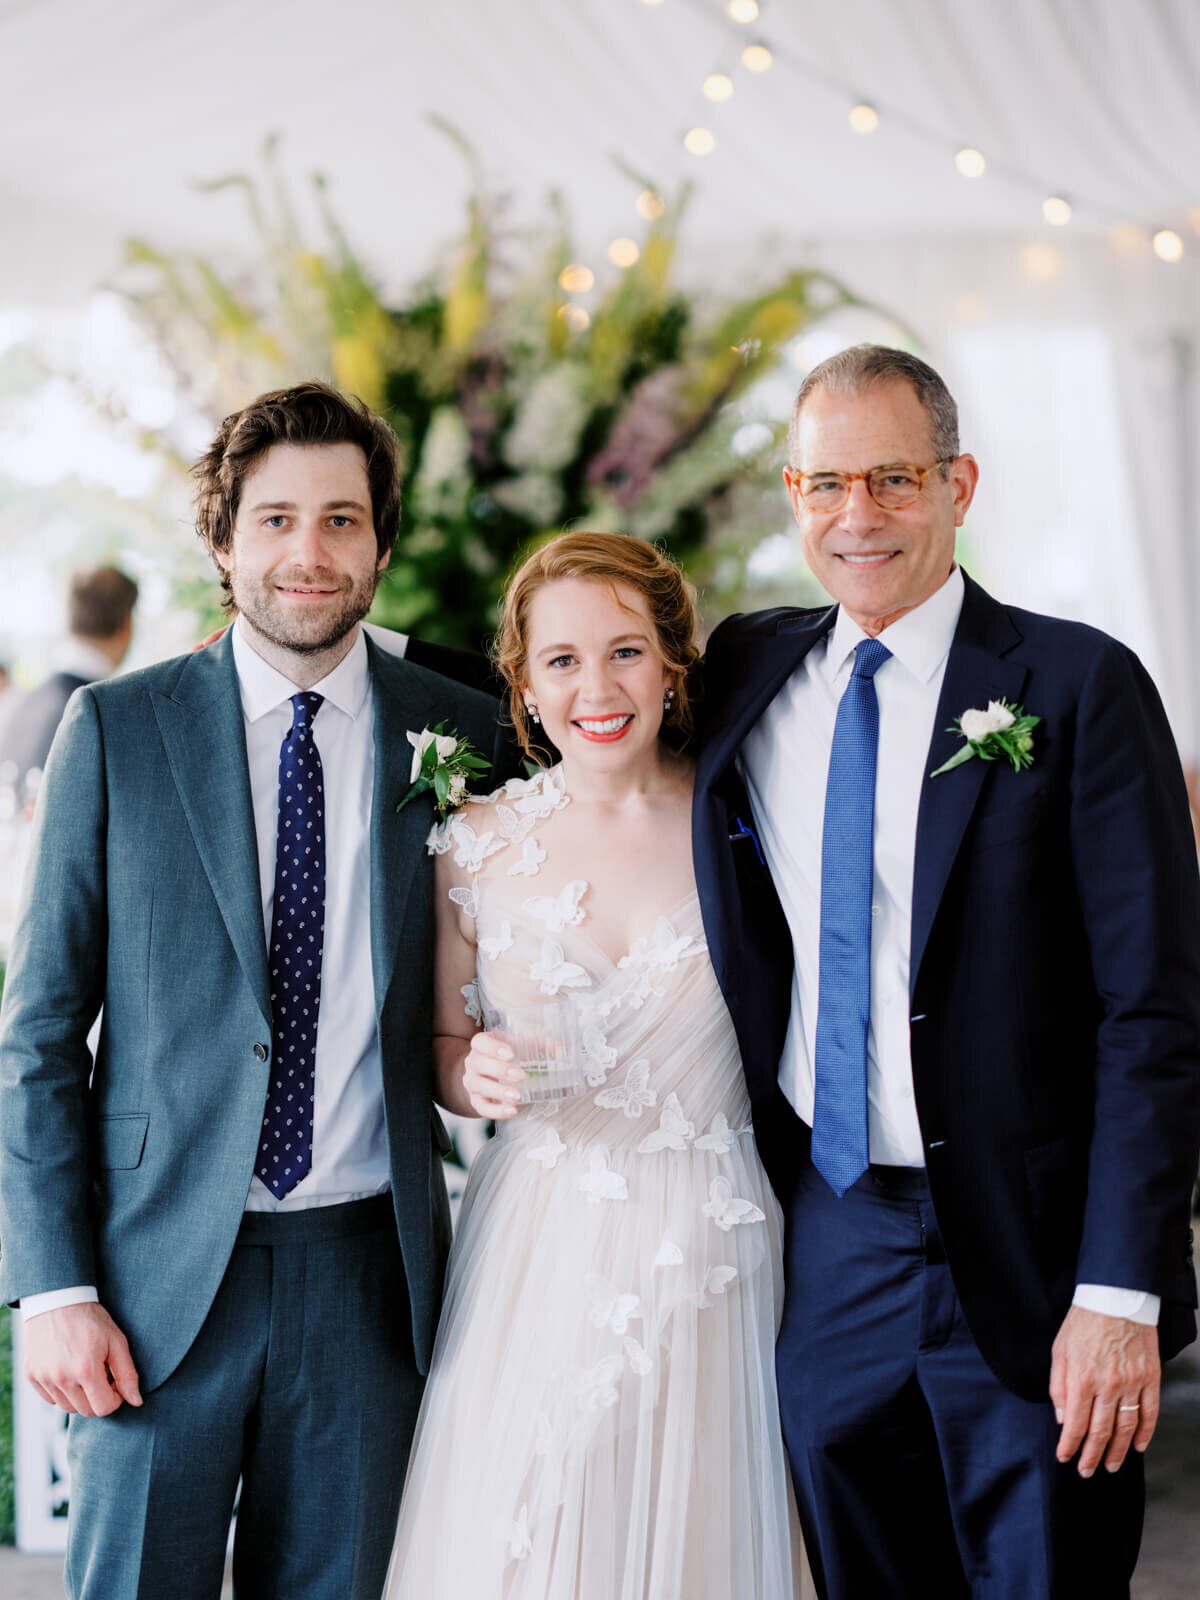 The bride and the groom, together with an old man in a suit, are standing and smiling on a large flower arrangement background.